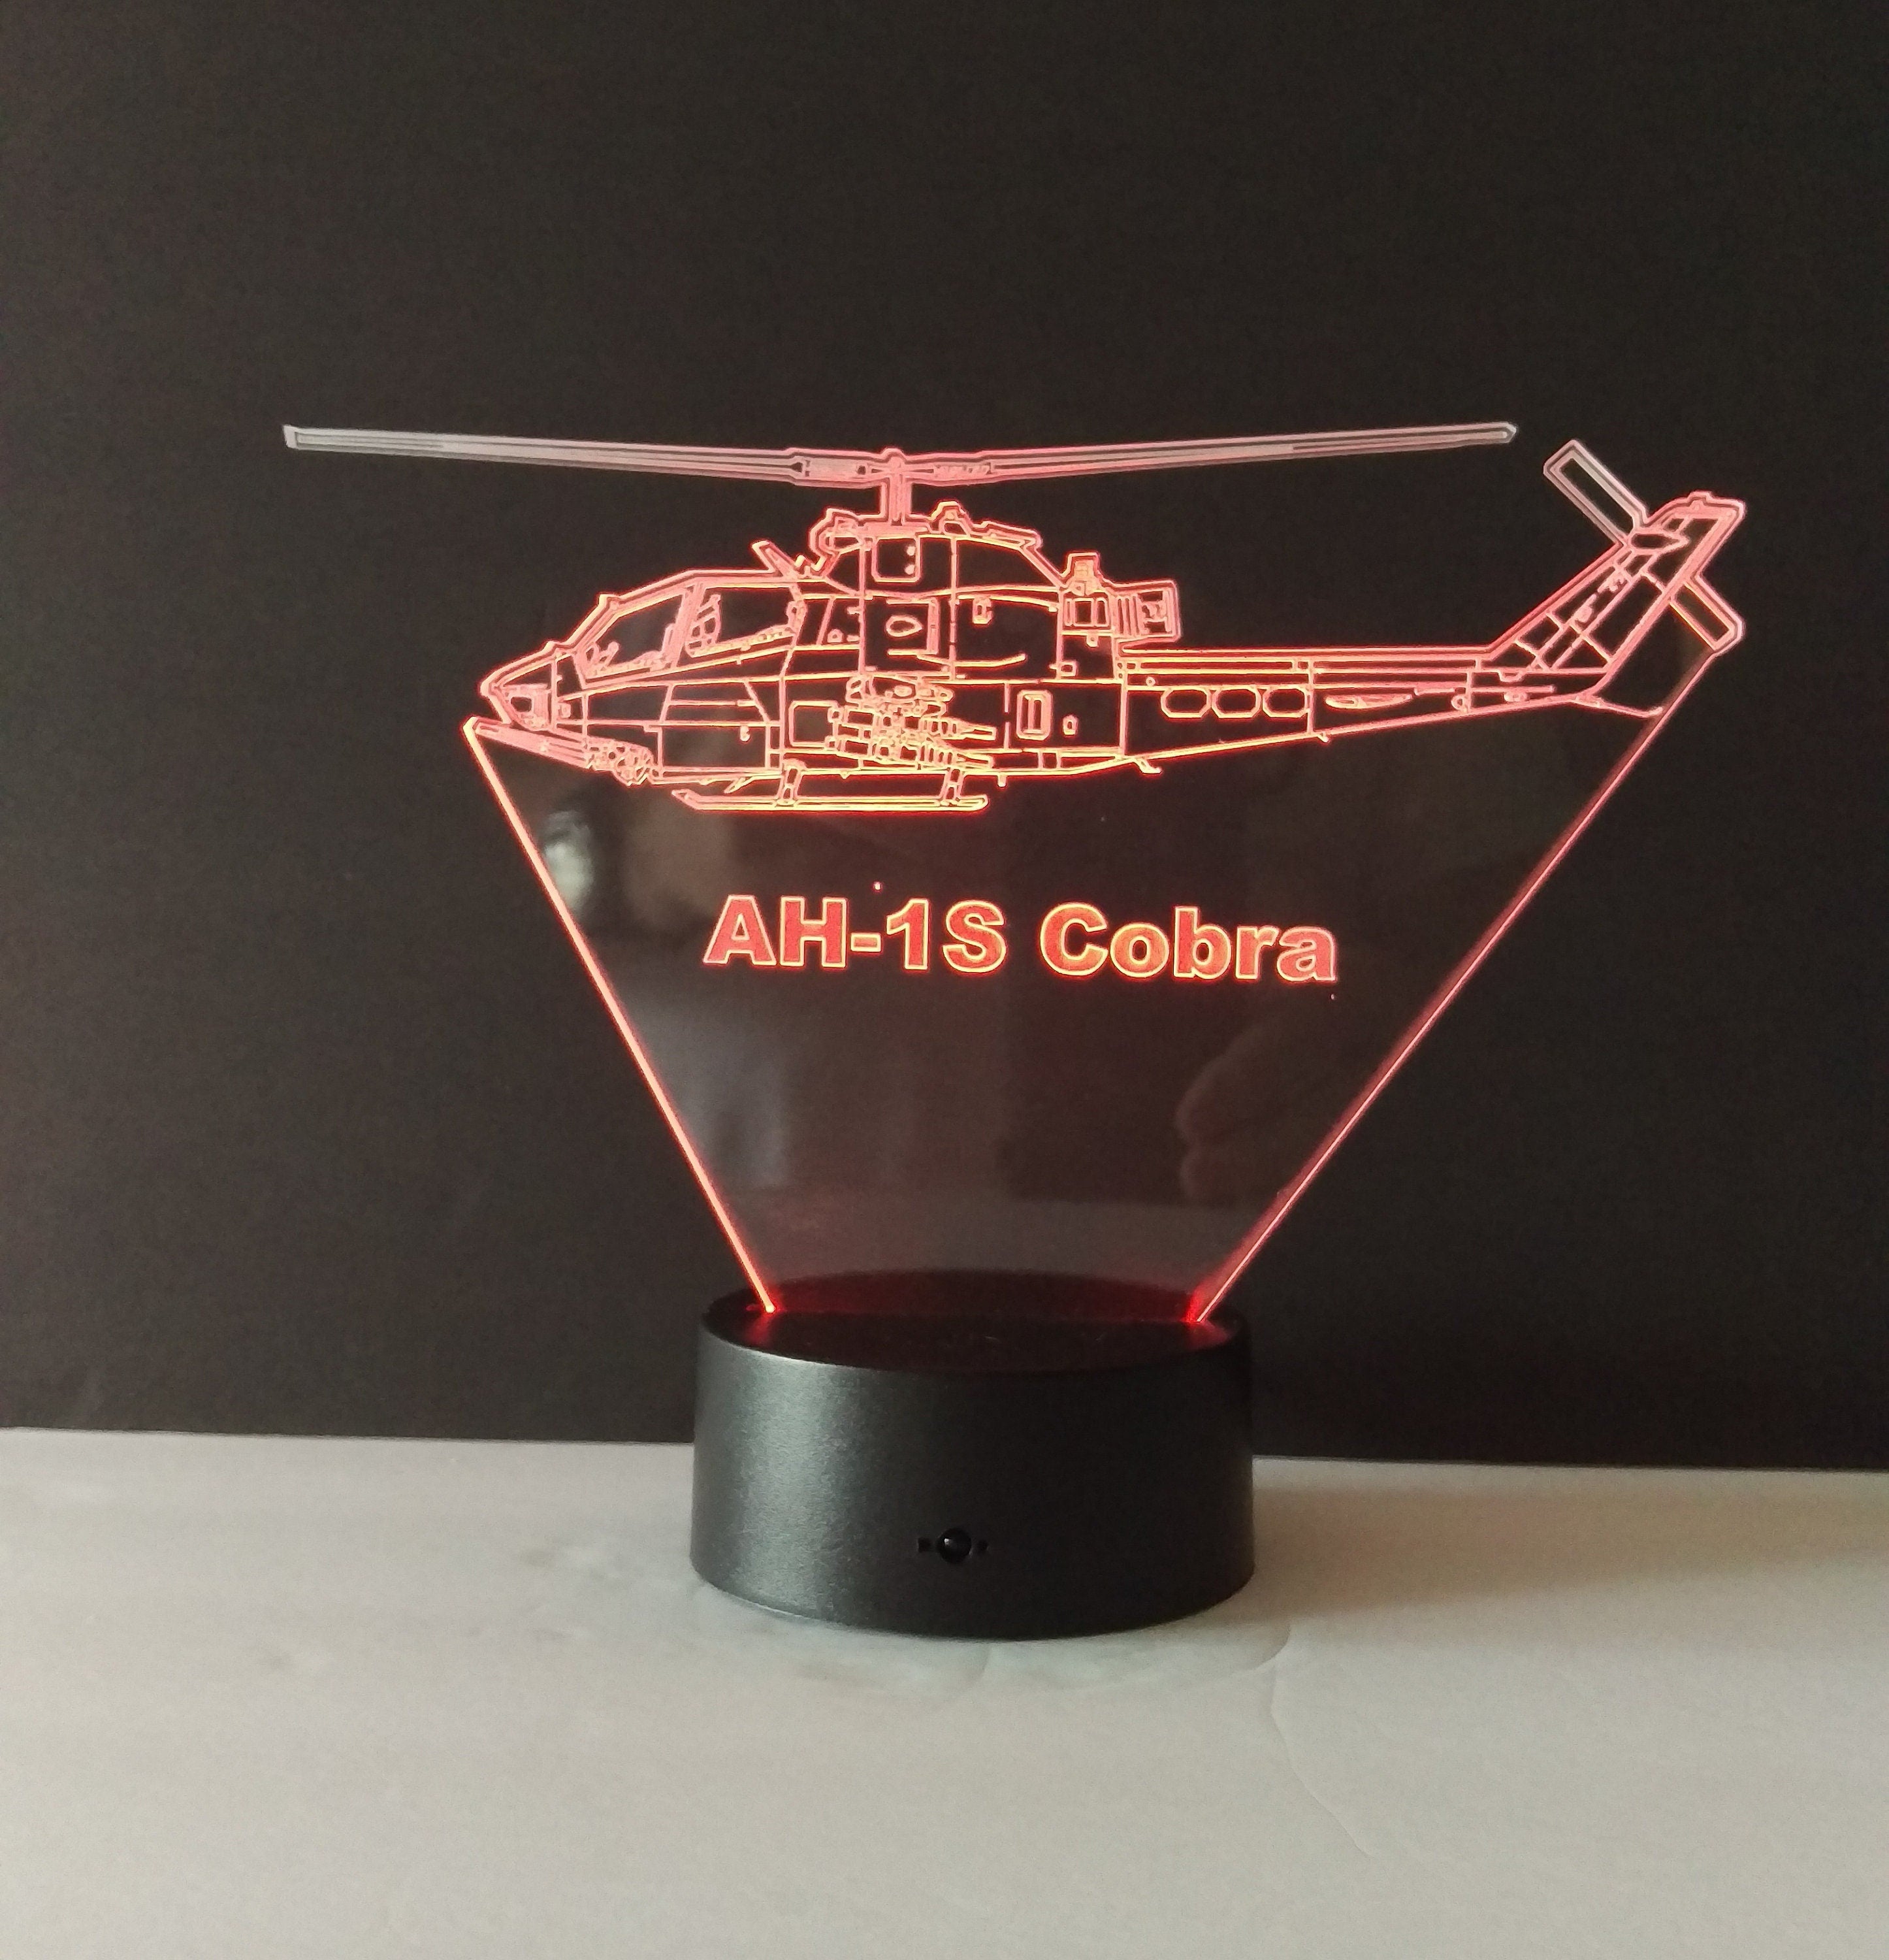 Awesome "AH-1S Cobra Attack Helicopter" 3D LED Lamp (2642)